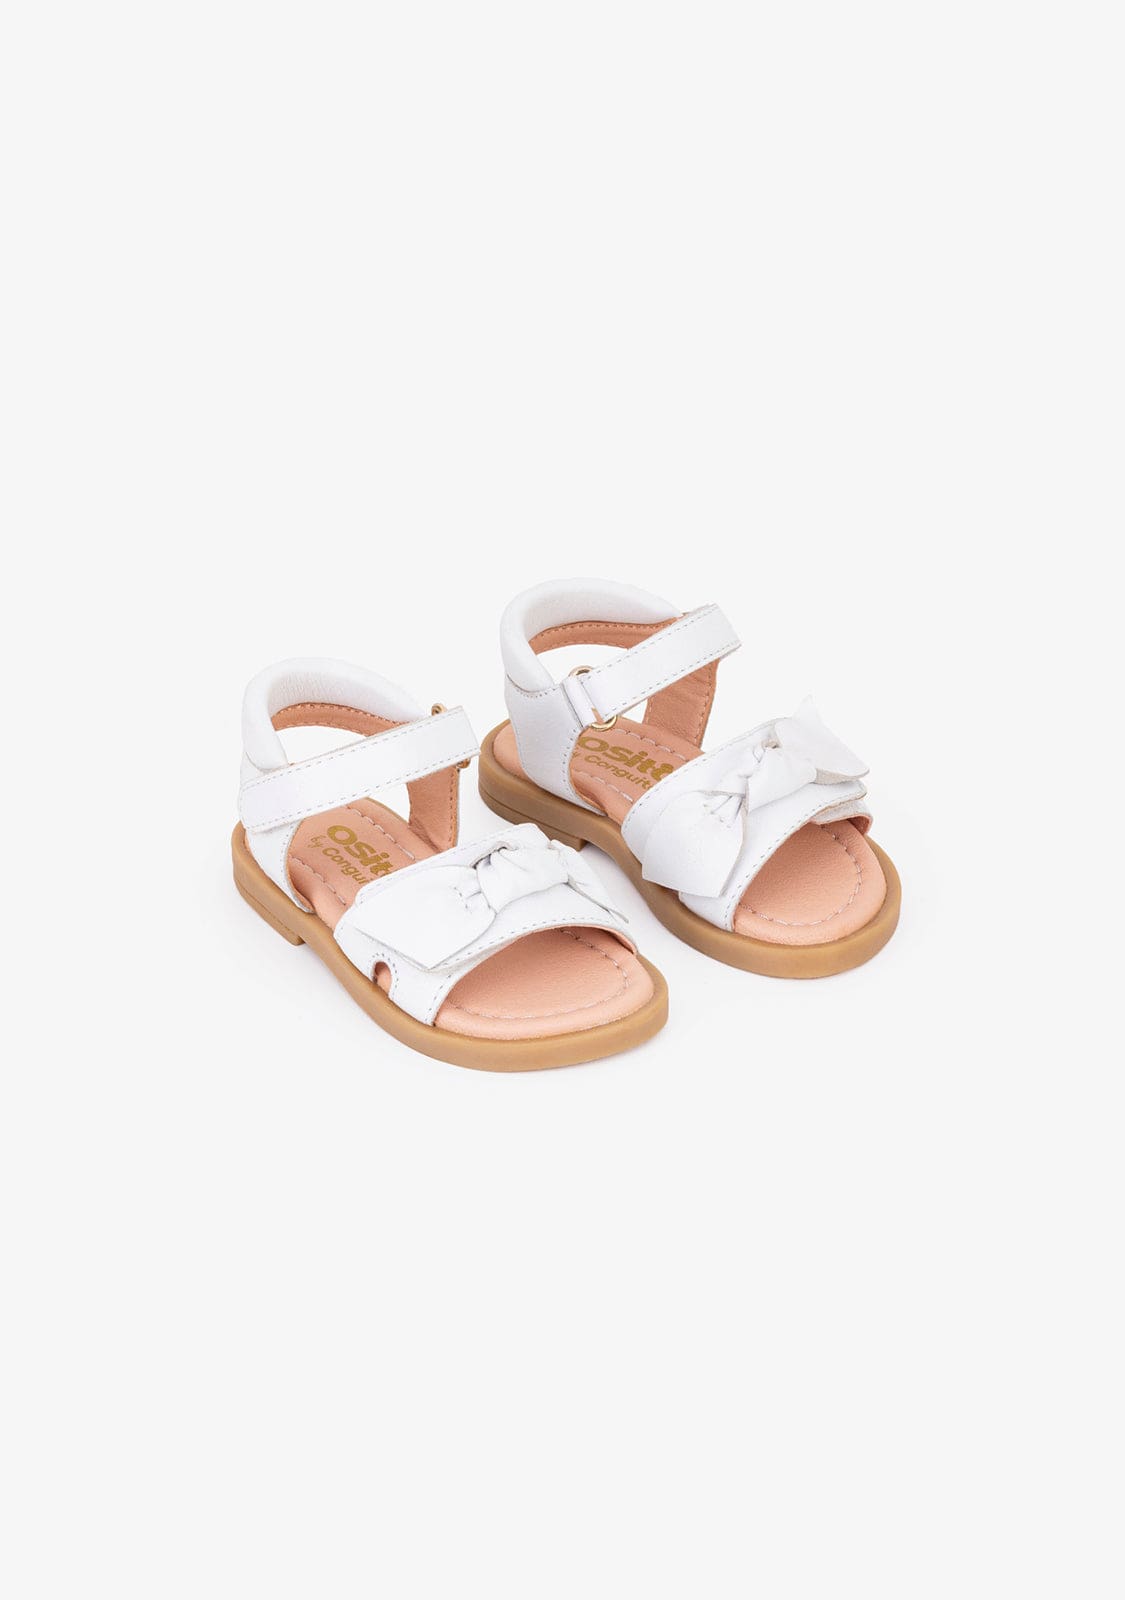 OSITO Shoes Baby's Bow White Leather Sandals